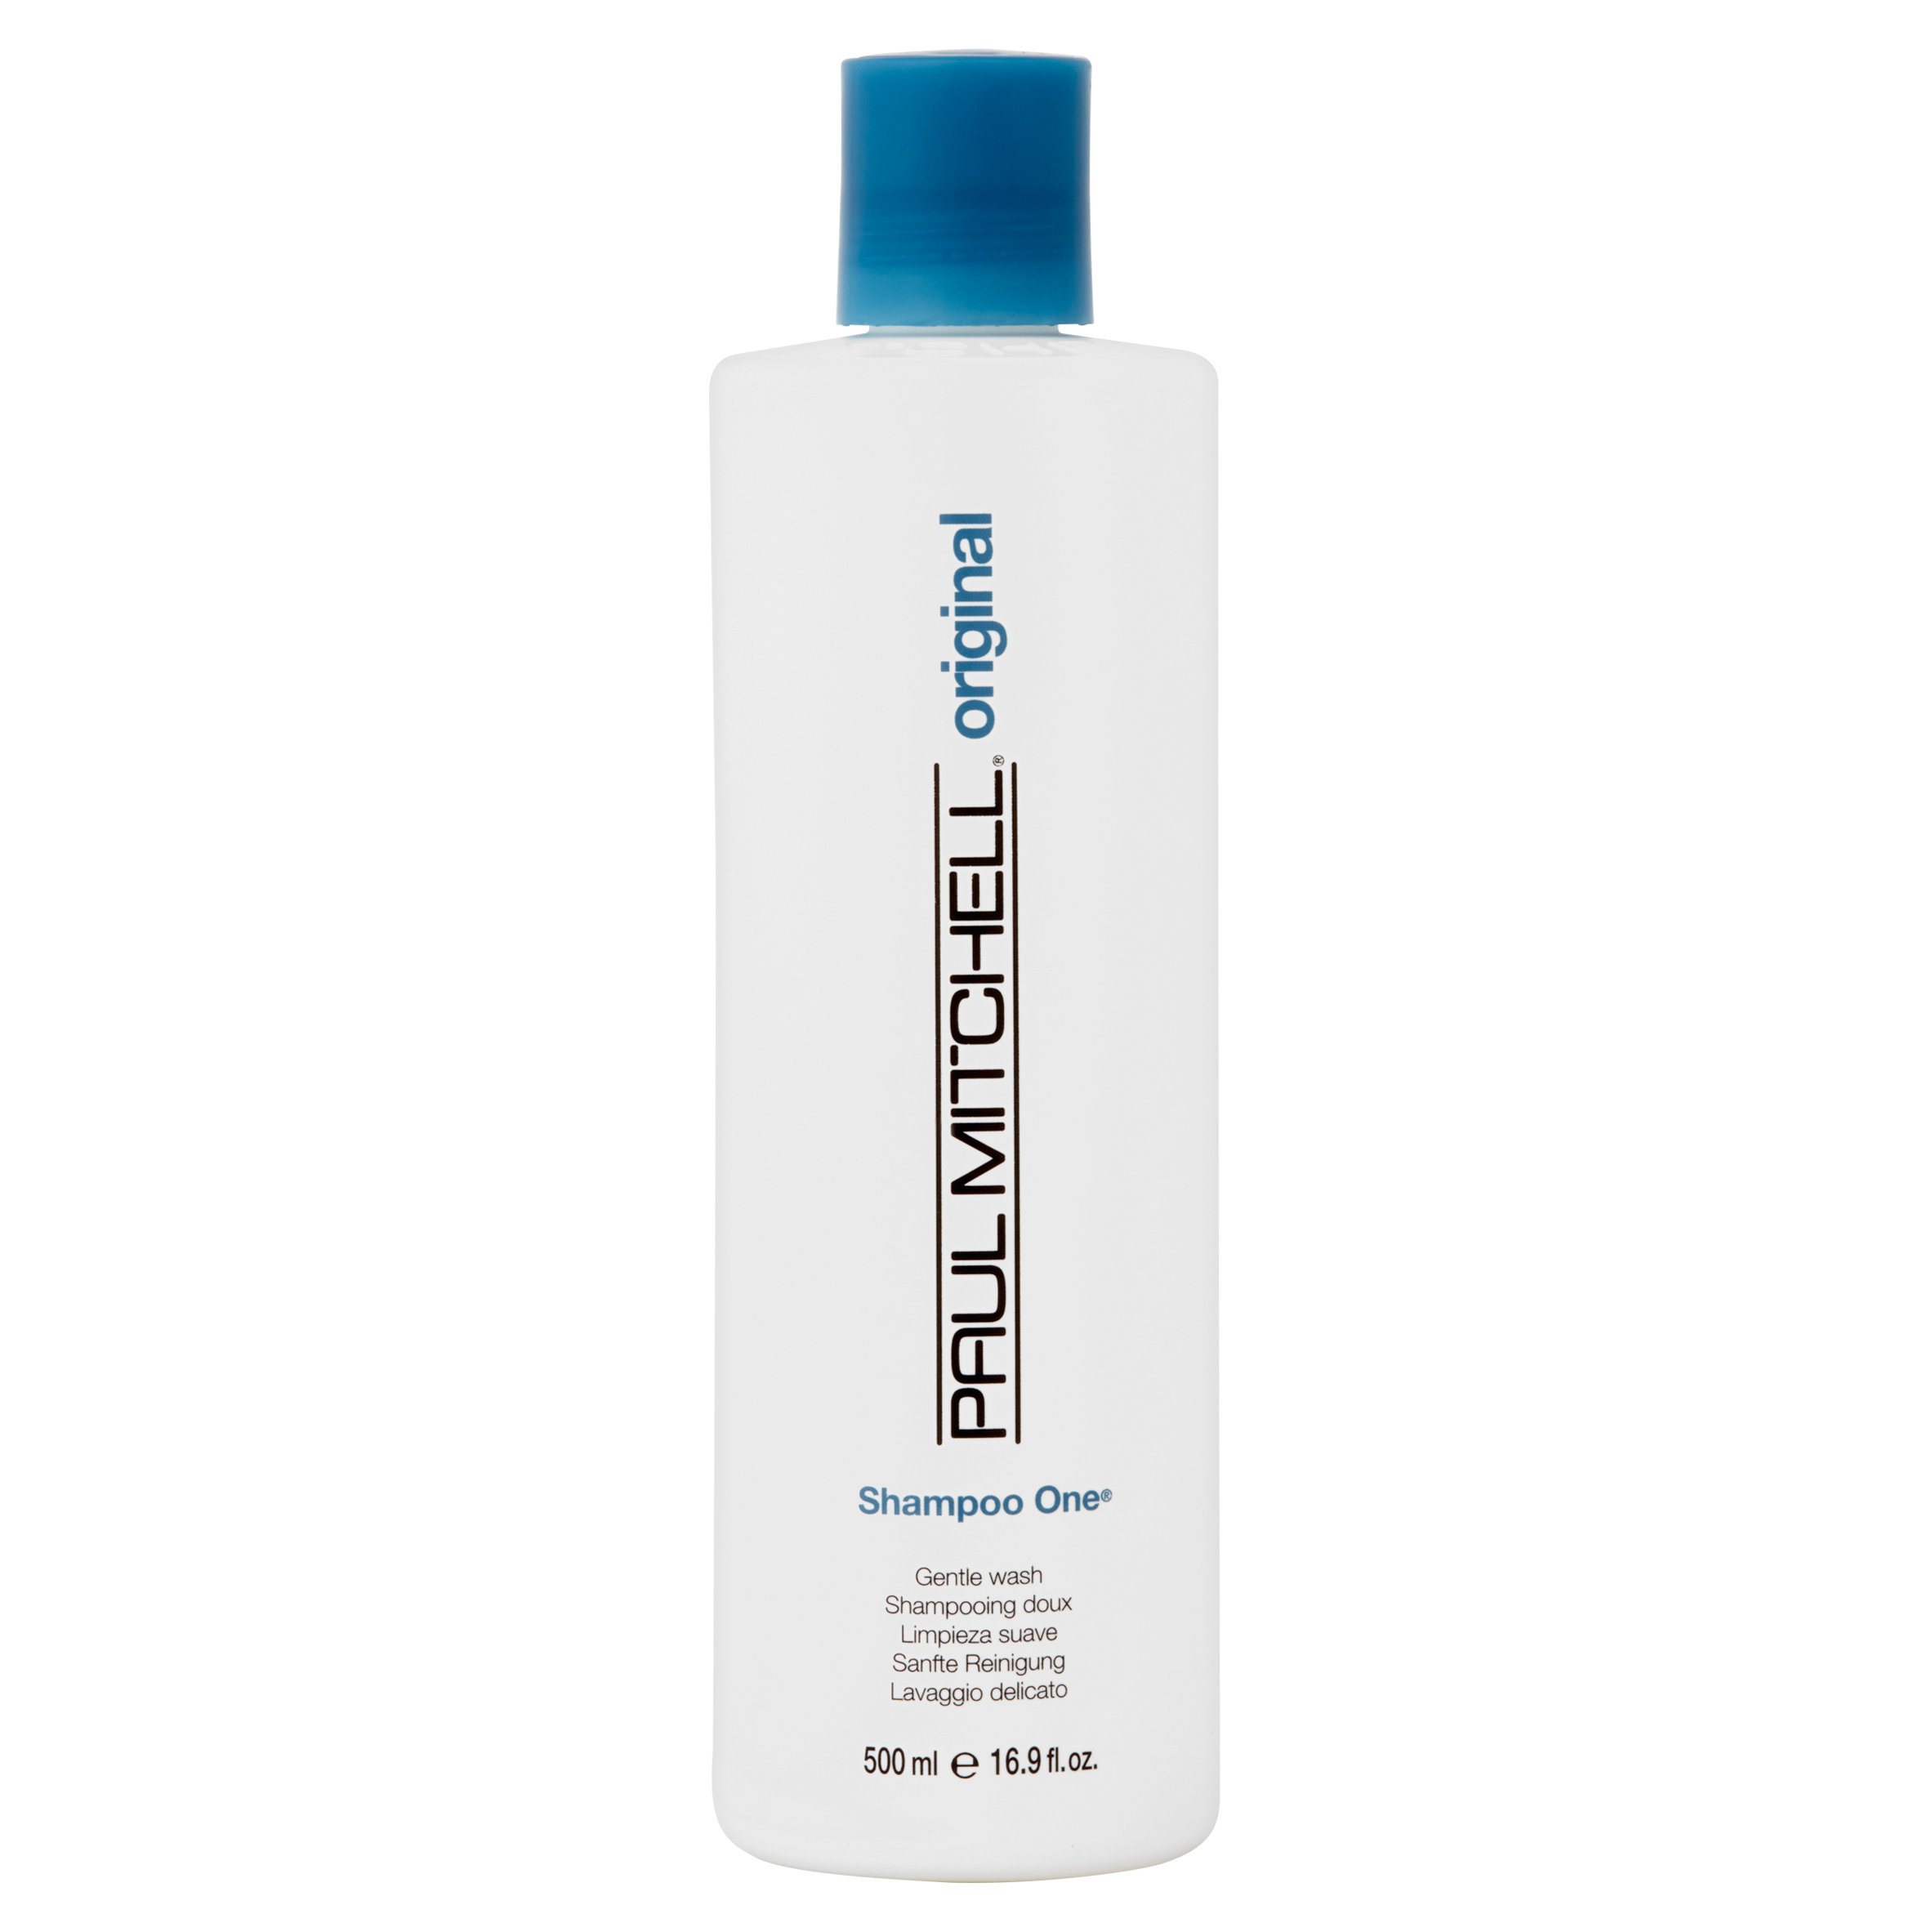 Paul Mitchell Original Dandruff Relief Color Protection Daily Shampoo, 16.9 fl oz - image 1 of 2